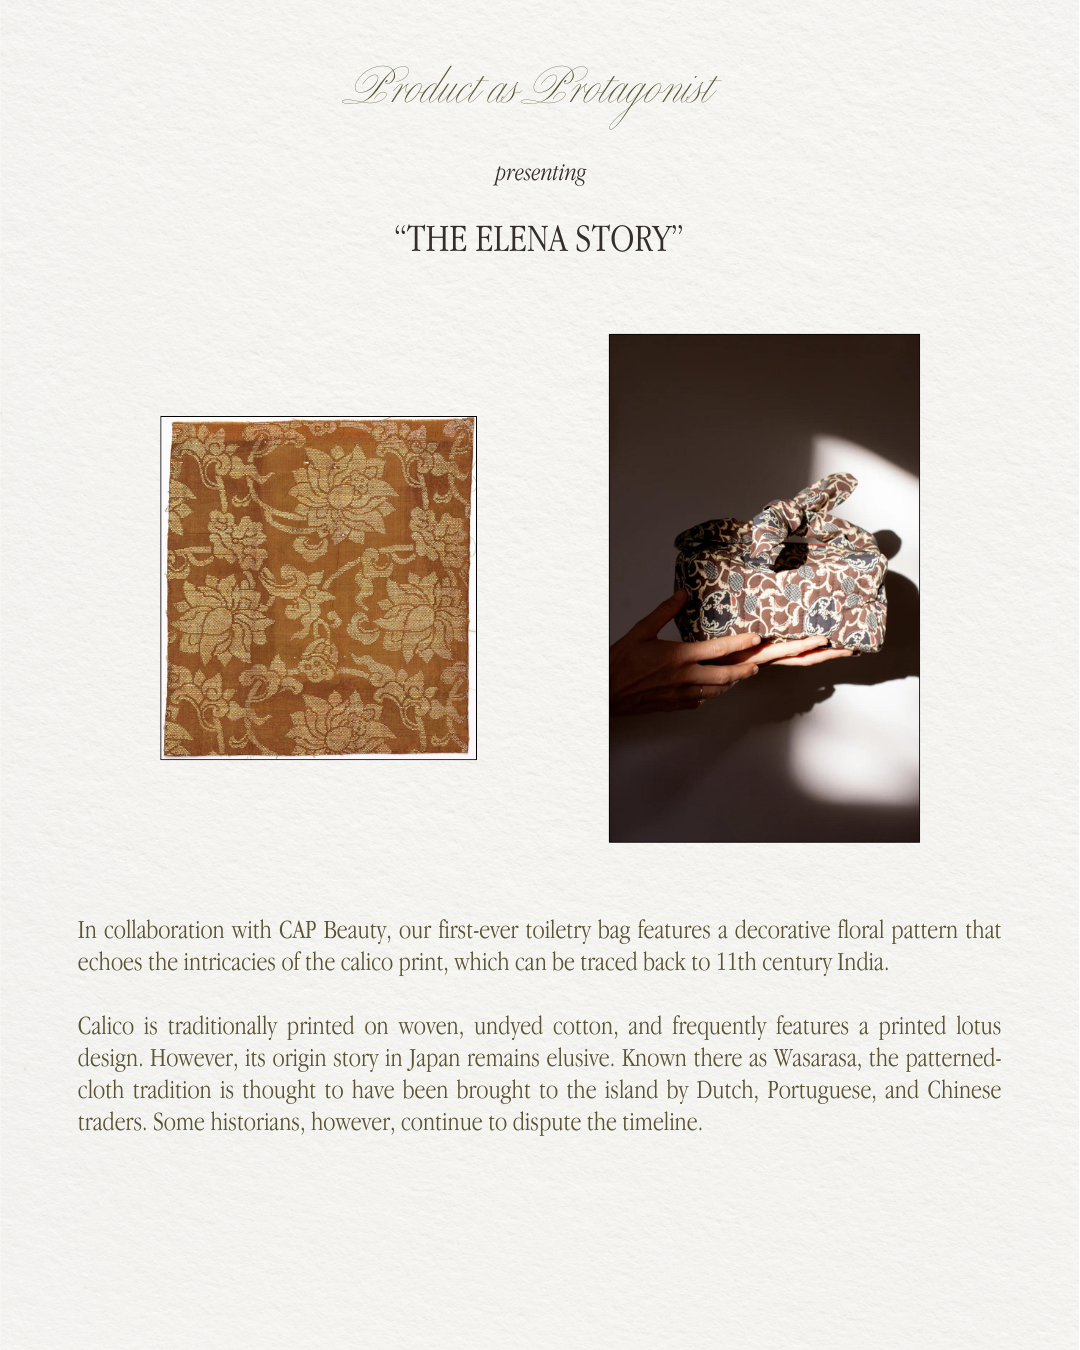 PRODUCT AS PROTAGONIST: The Elena Story